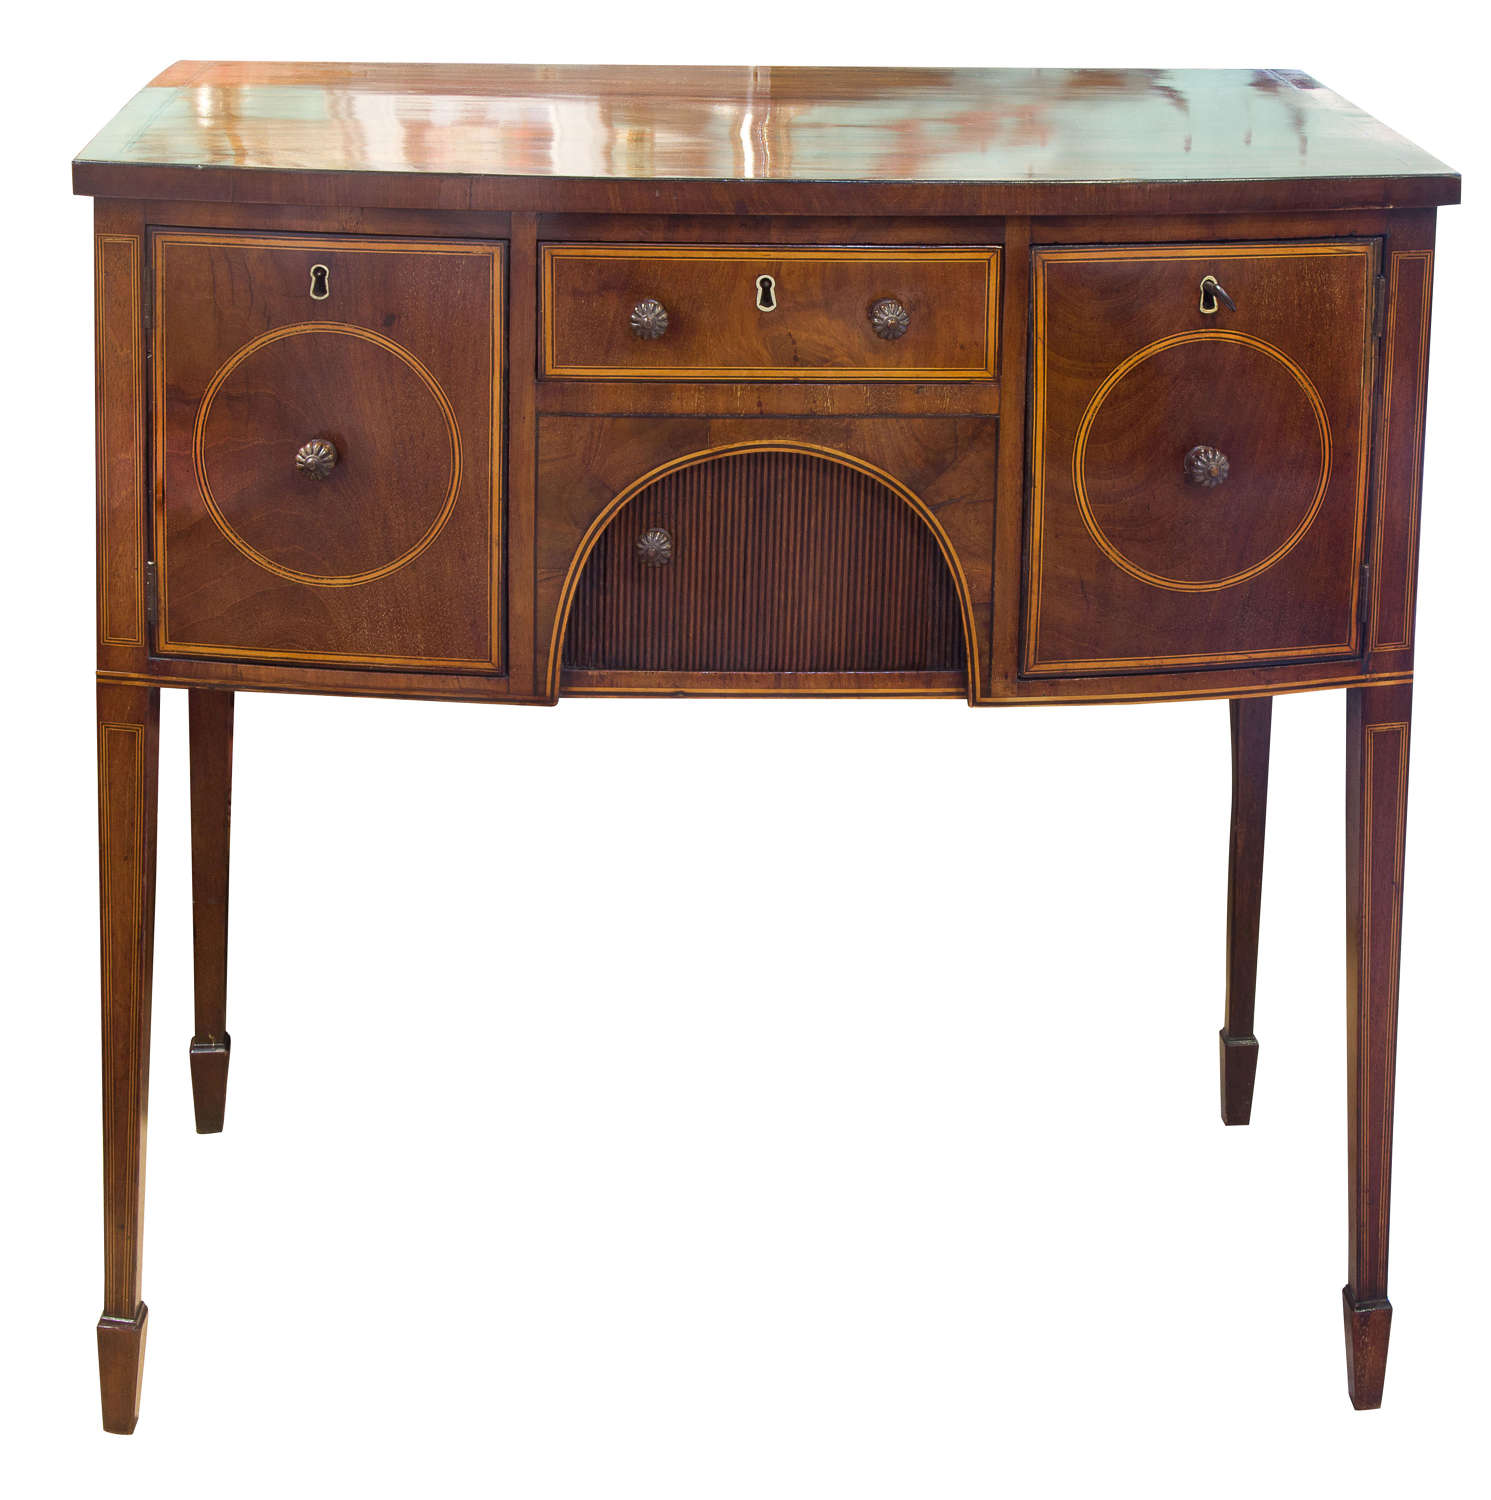 Exceptionally small 19thc sideboard